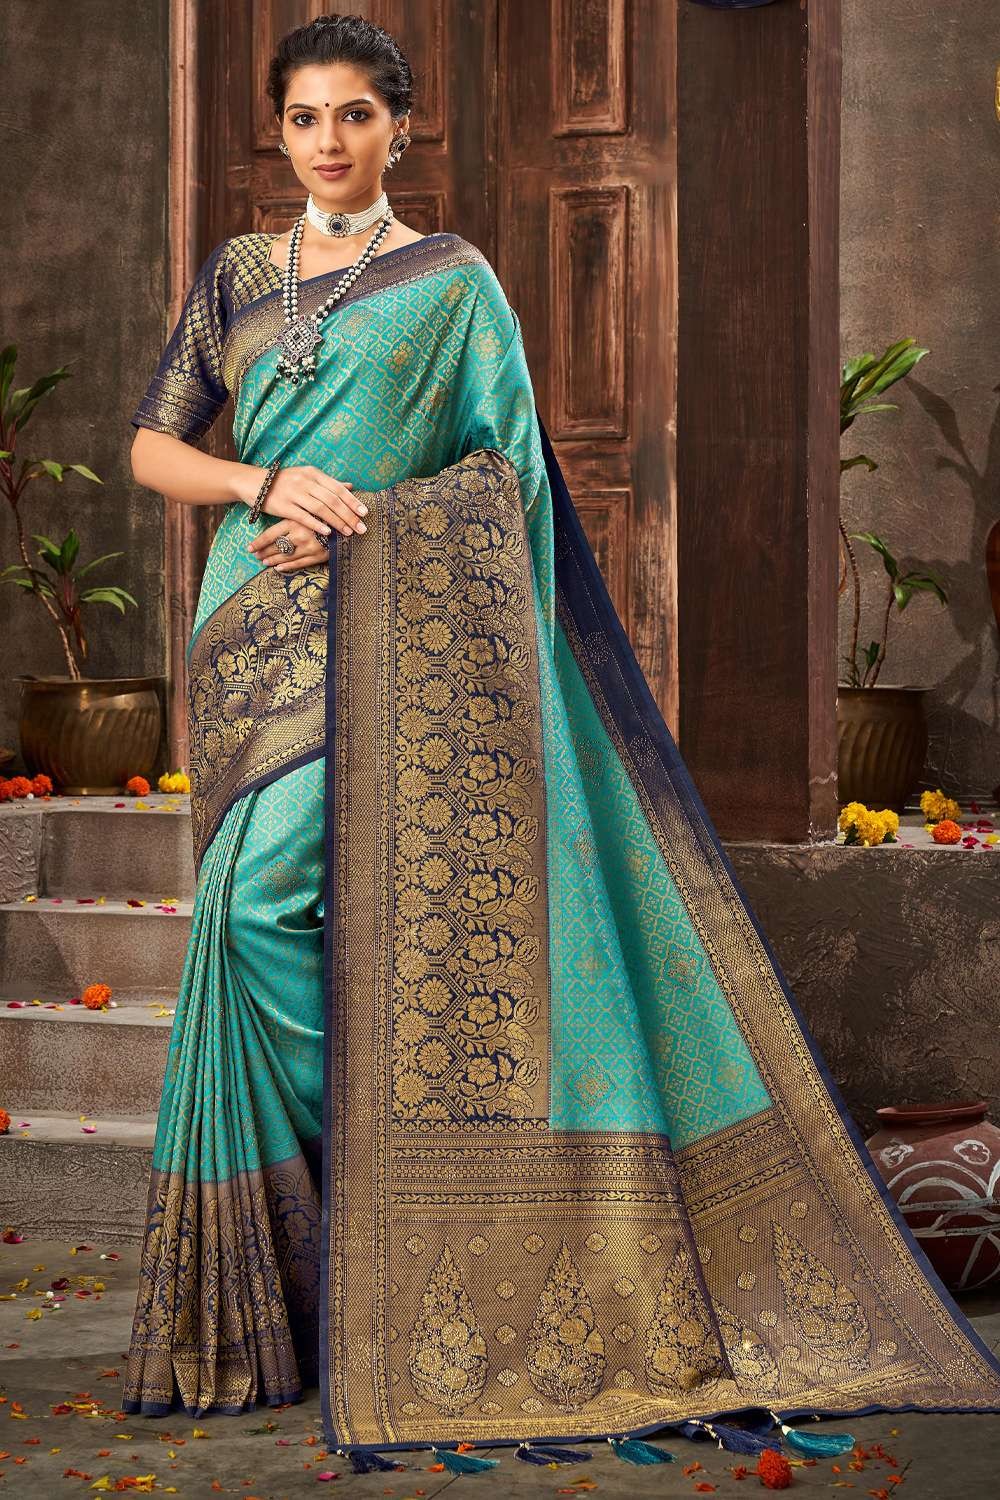 Patron Texofab Zardozi Work South Indian Soft Silk Saree, 6.3 m (with  blouse piece) at Rs 700 in Surat